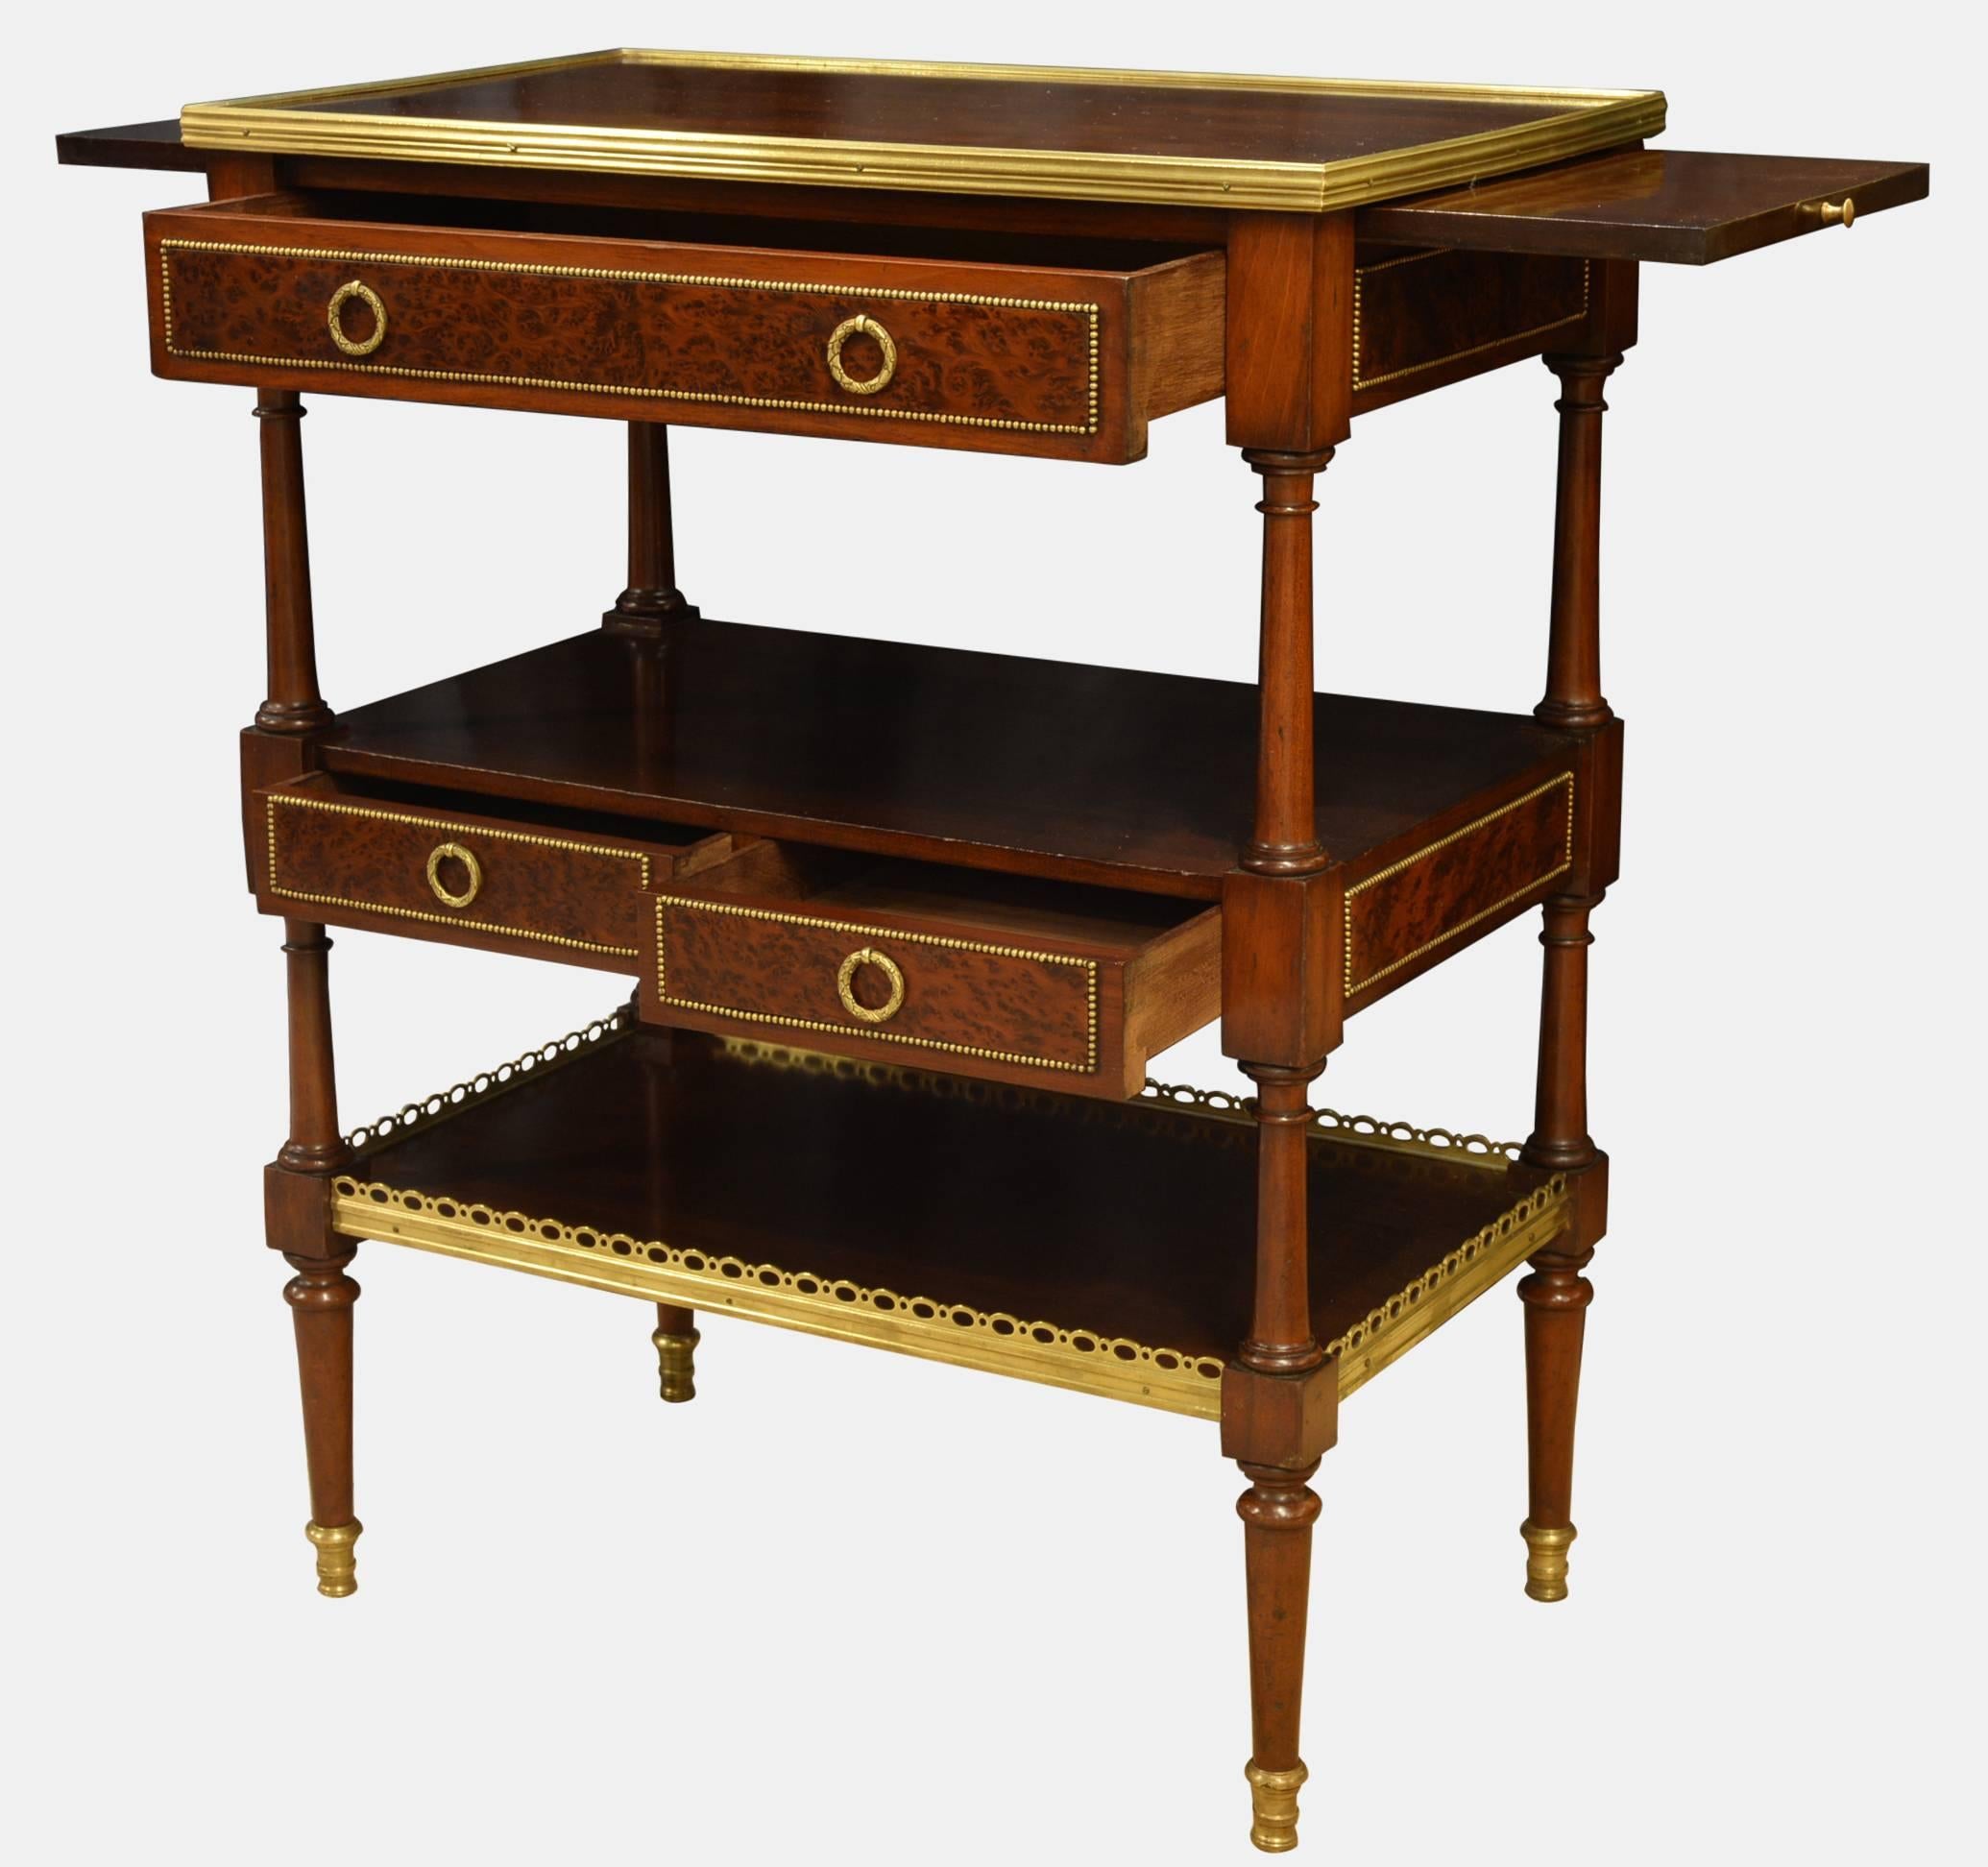 French Directoire style mahogany etagere of very fine quality. A rare feature being the brass beaded panels to four sides. An elegant and useful drawing room or bedside table,

circa 1890.